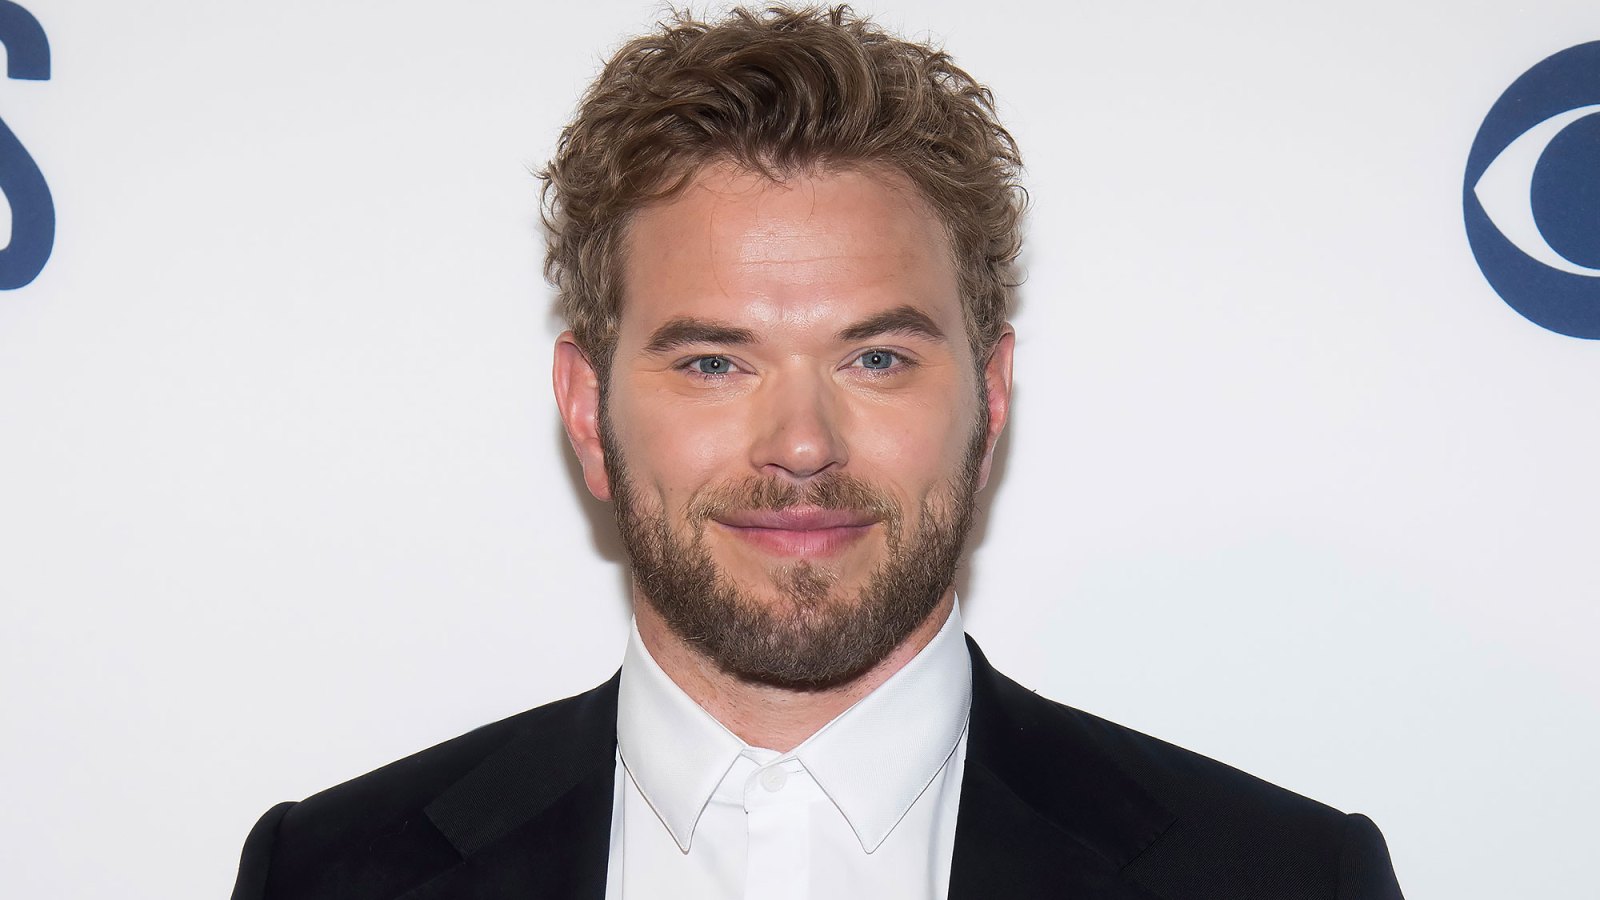 Kellan Lutz Is Exiting ‘FBI: Most Wanted’ to Spend Time With Family: ‘Over and Out'